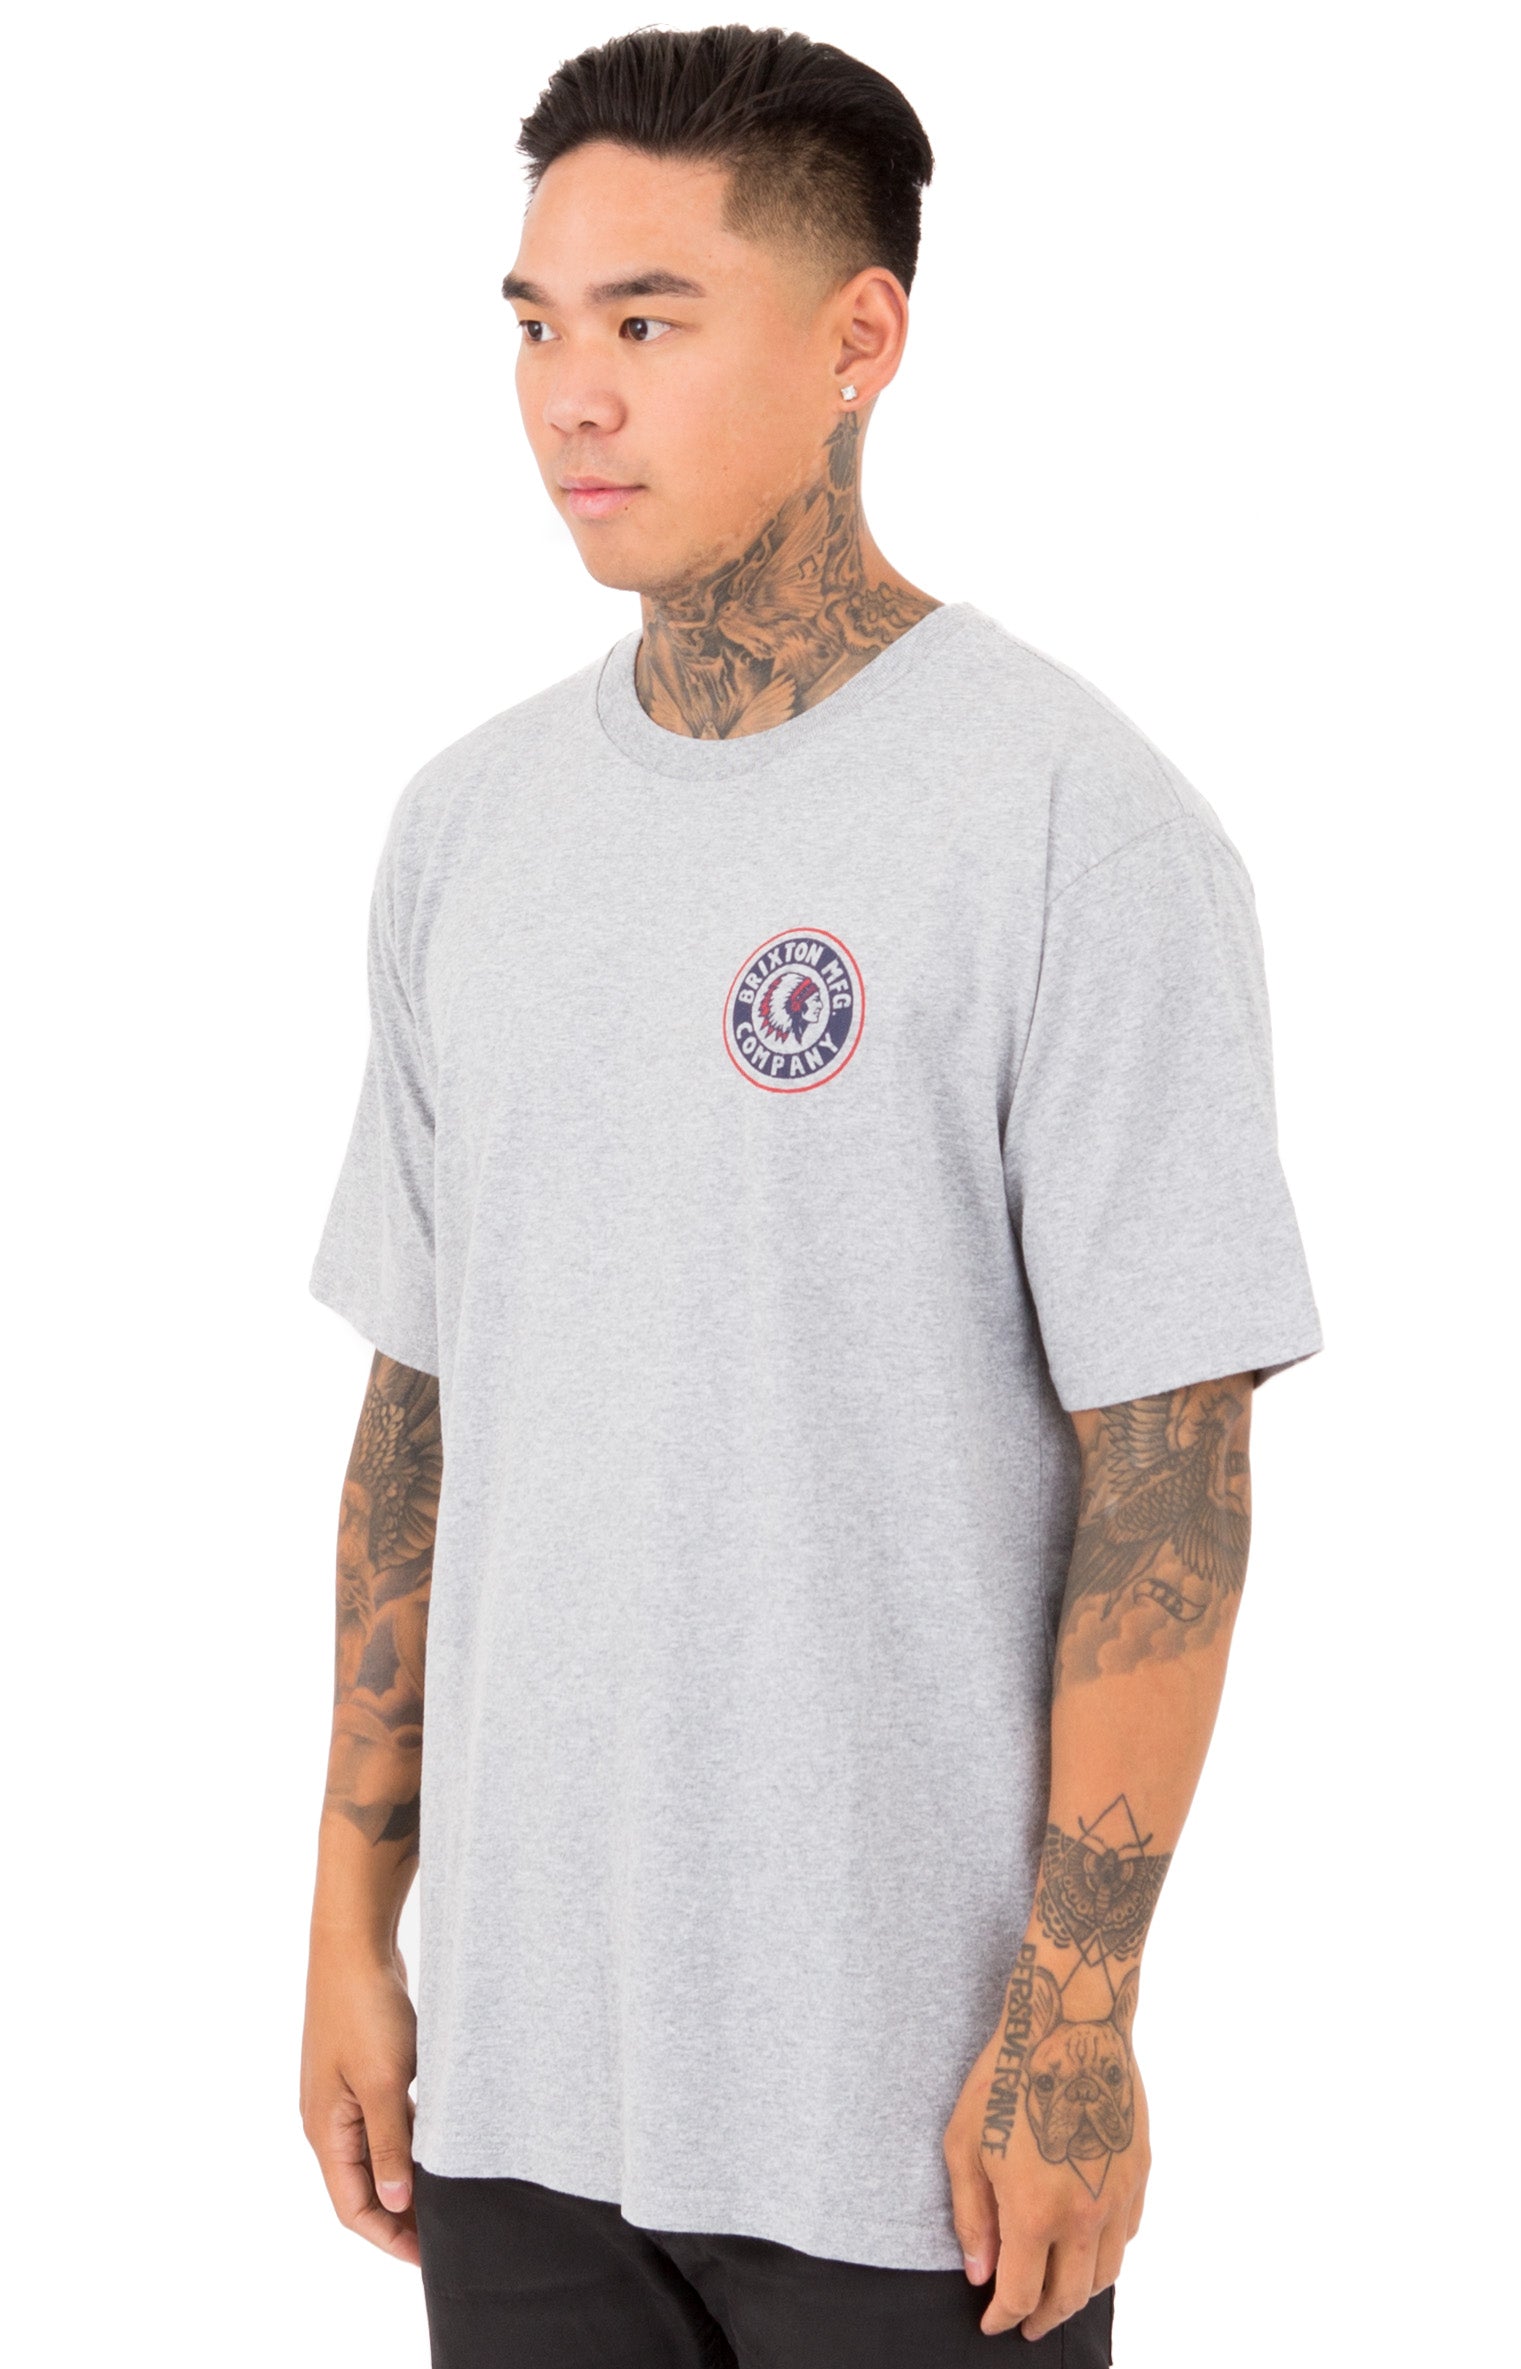 Rival II T-Shirt - Heather Grey/Red